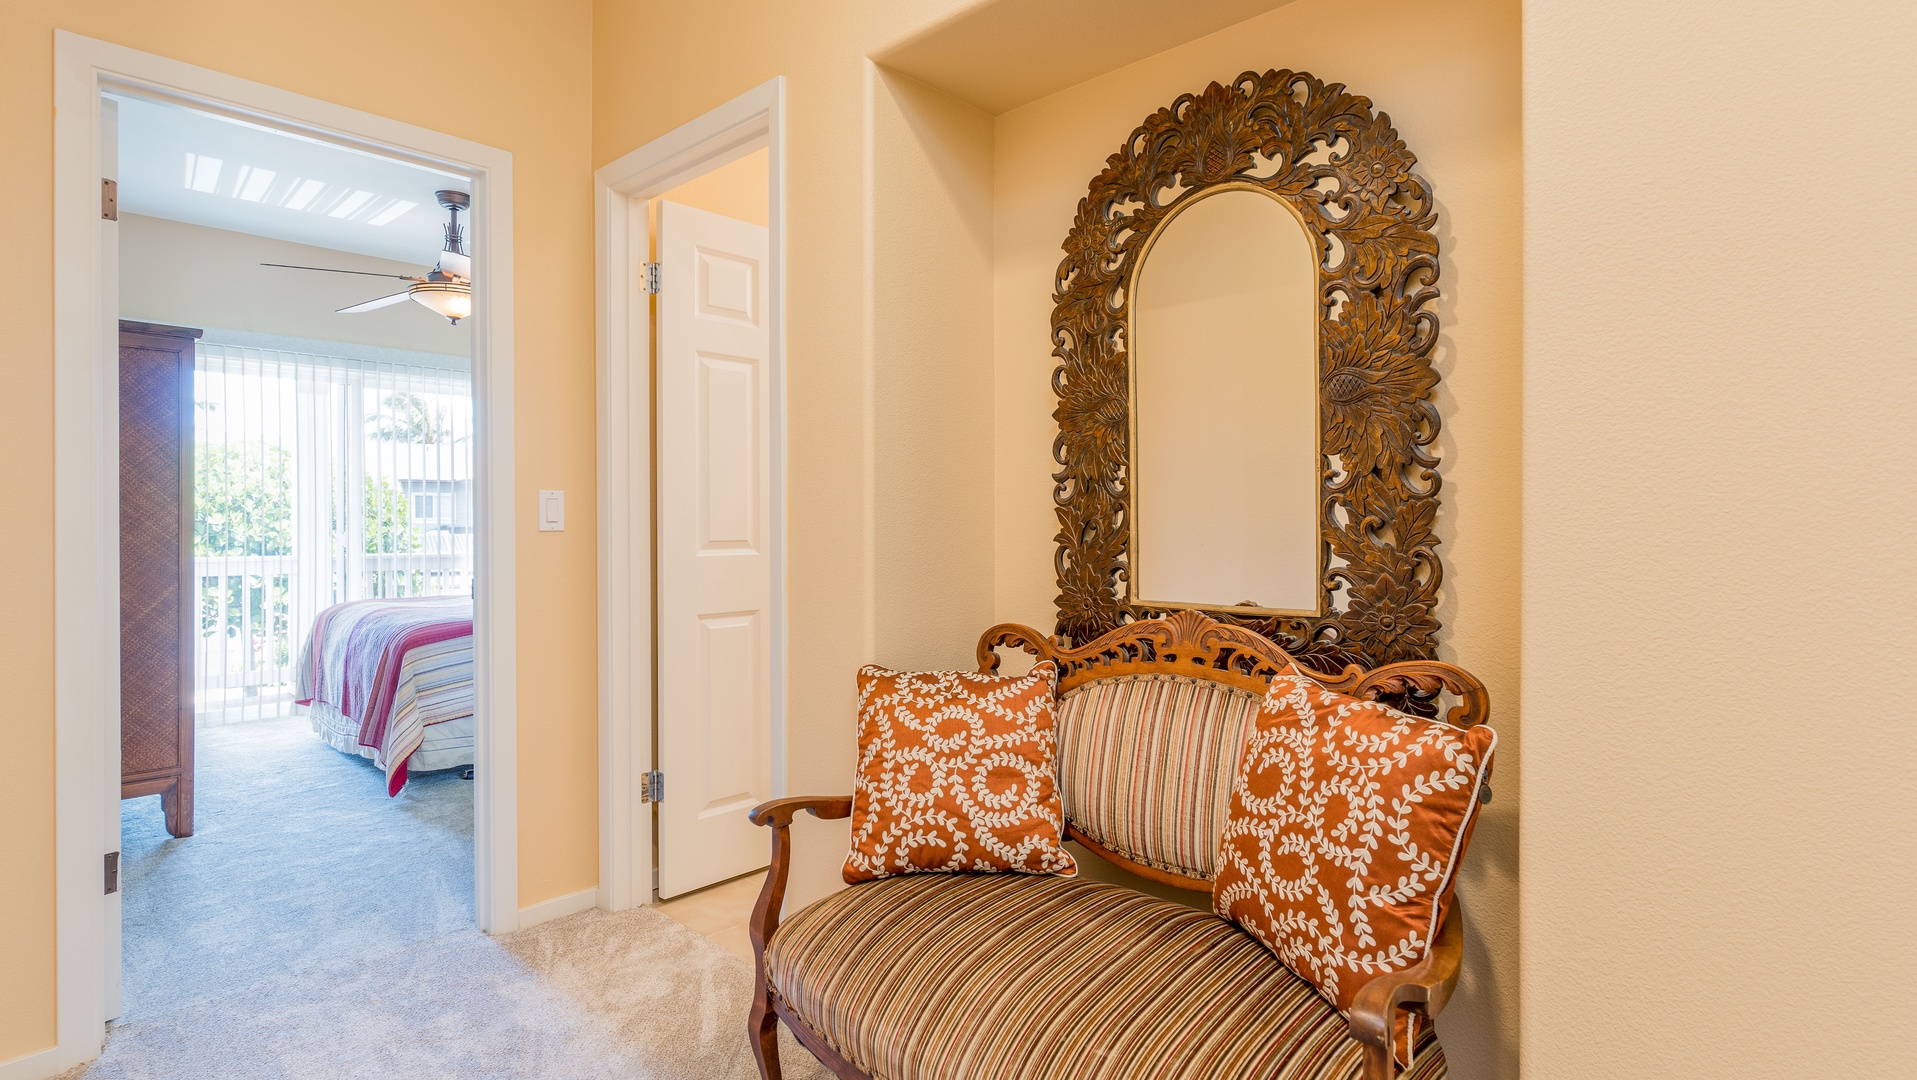 Kapolei Vacation Rentals, Coconut Plantation 1192-4 - A classic settee and  Polynesian mirror in the home.